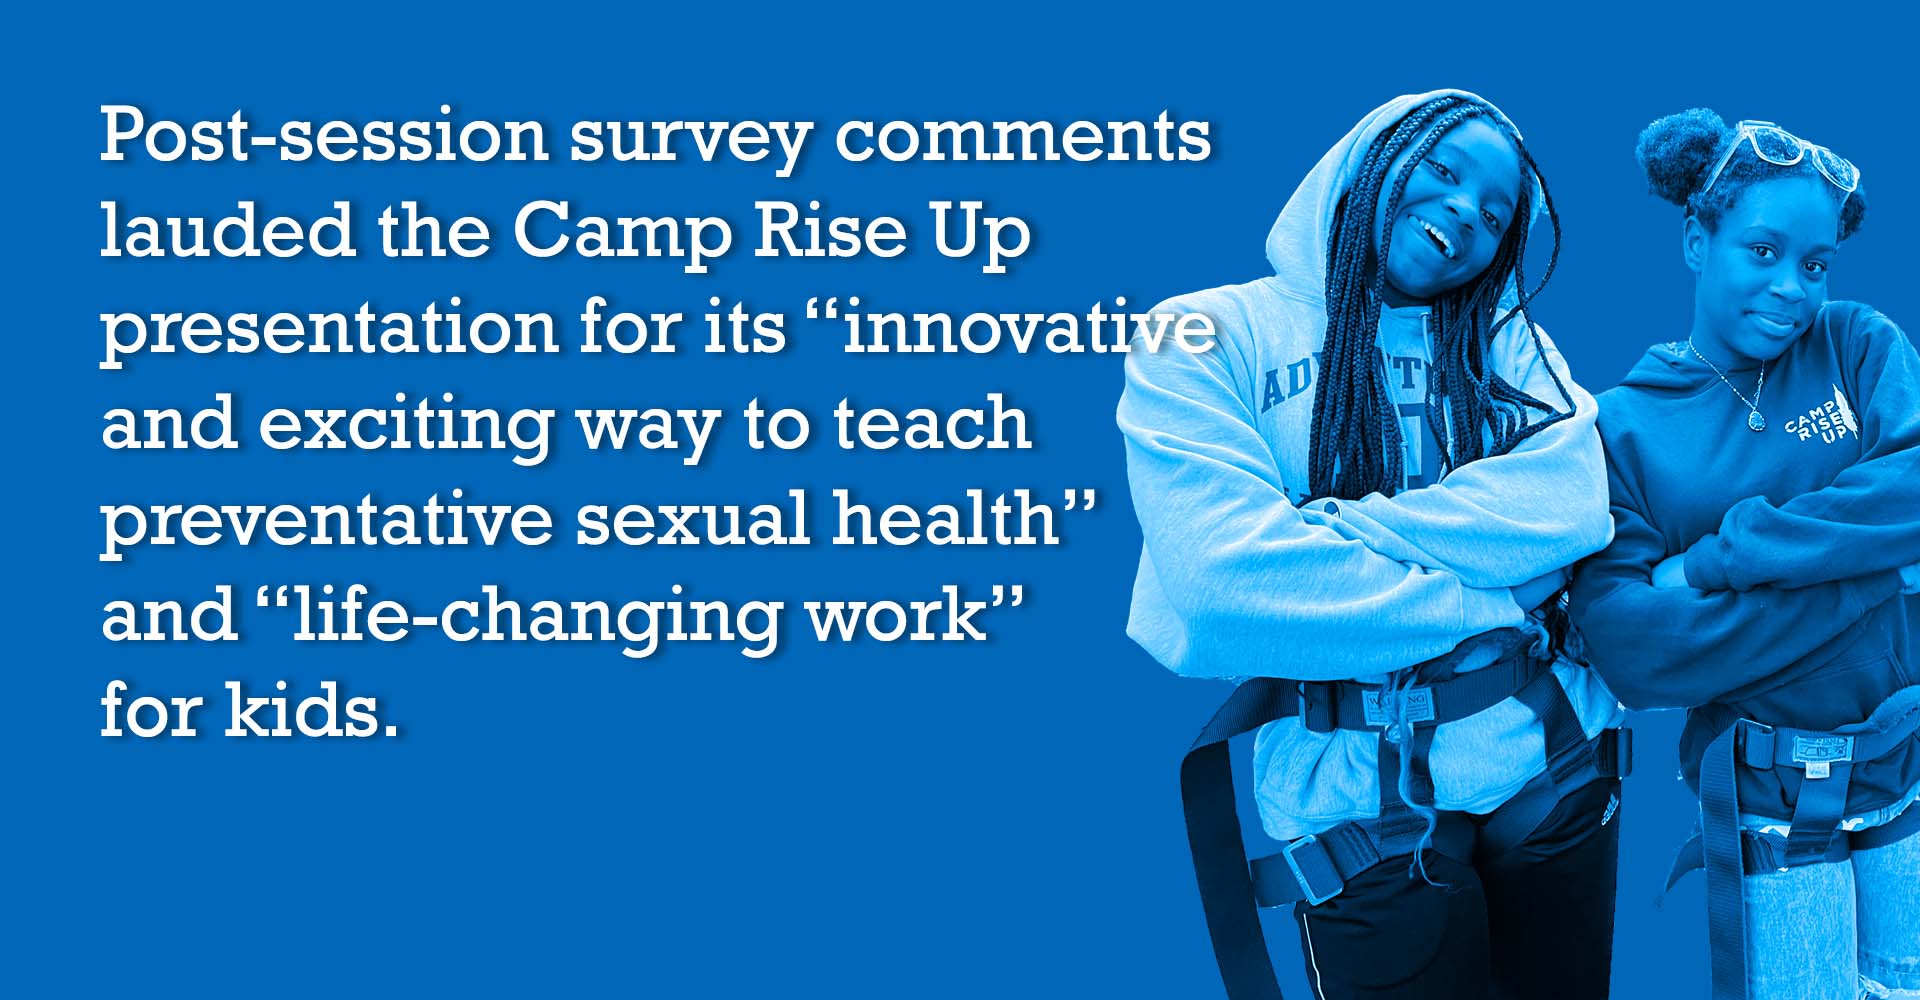 Post-session survey comments lauded the Camp Rise Up presentation for its “innovative and exciting way to teach preventative sexual health” and “life-changing work” for kids.